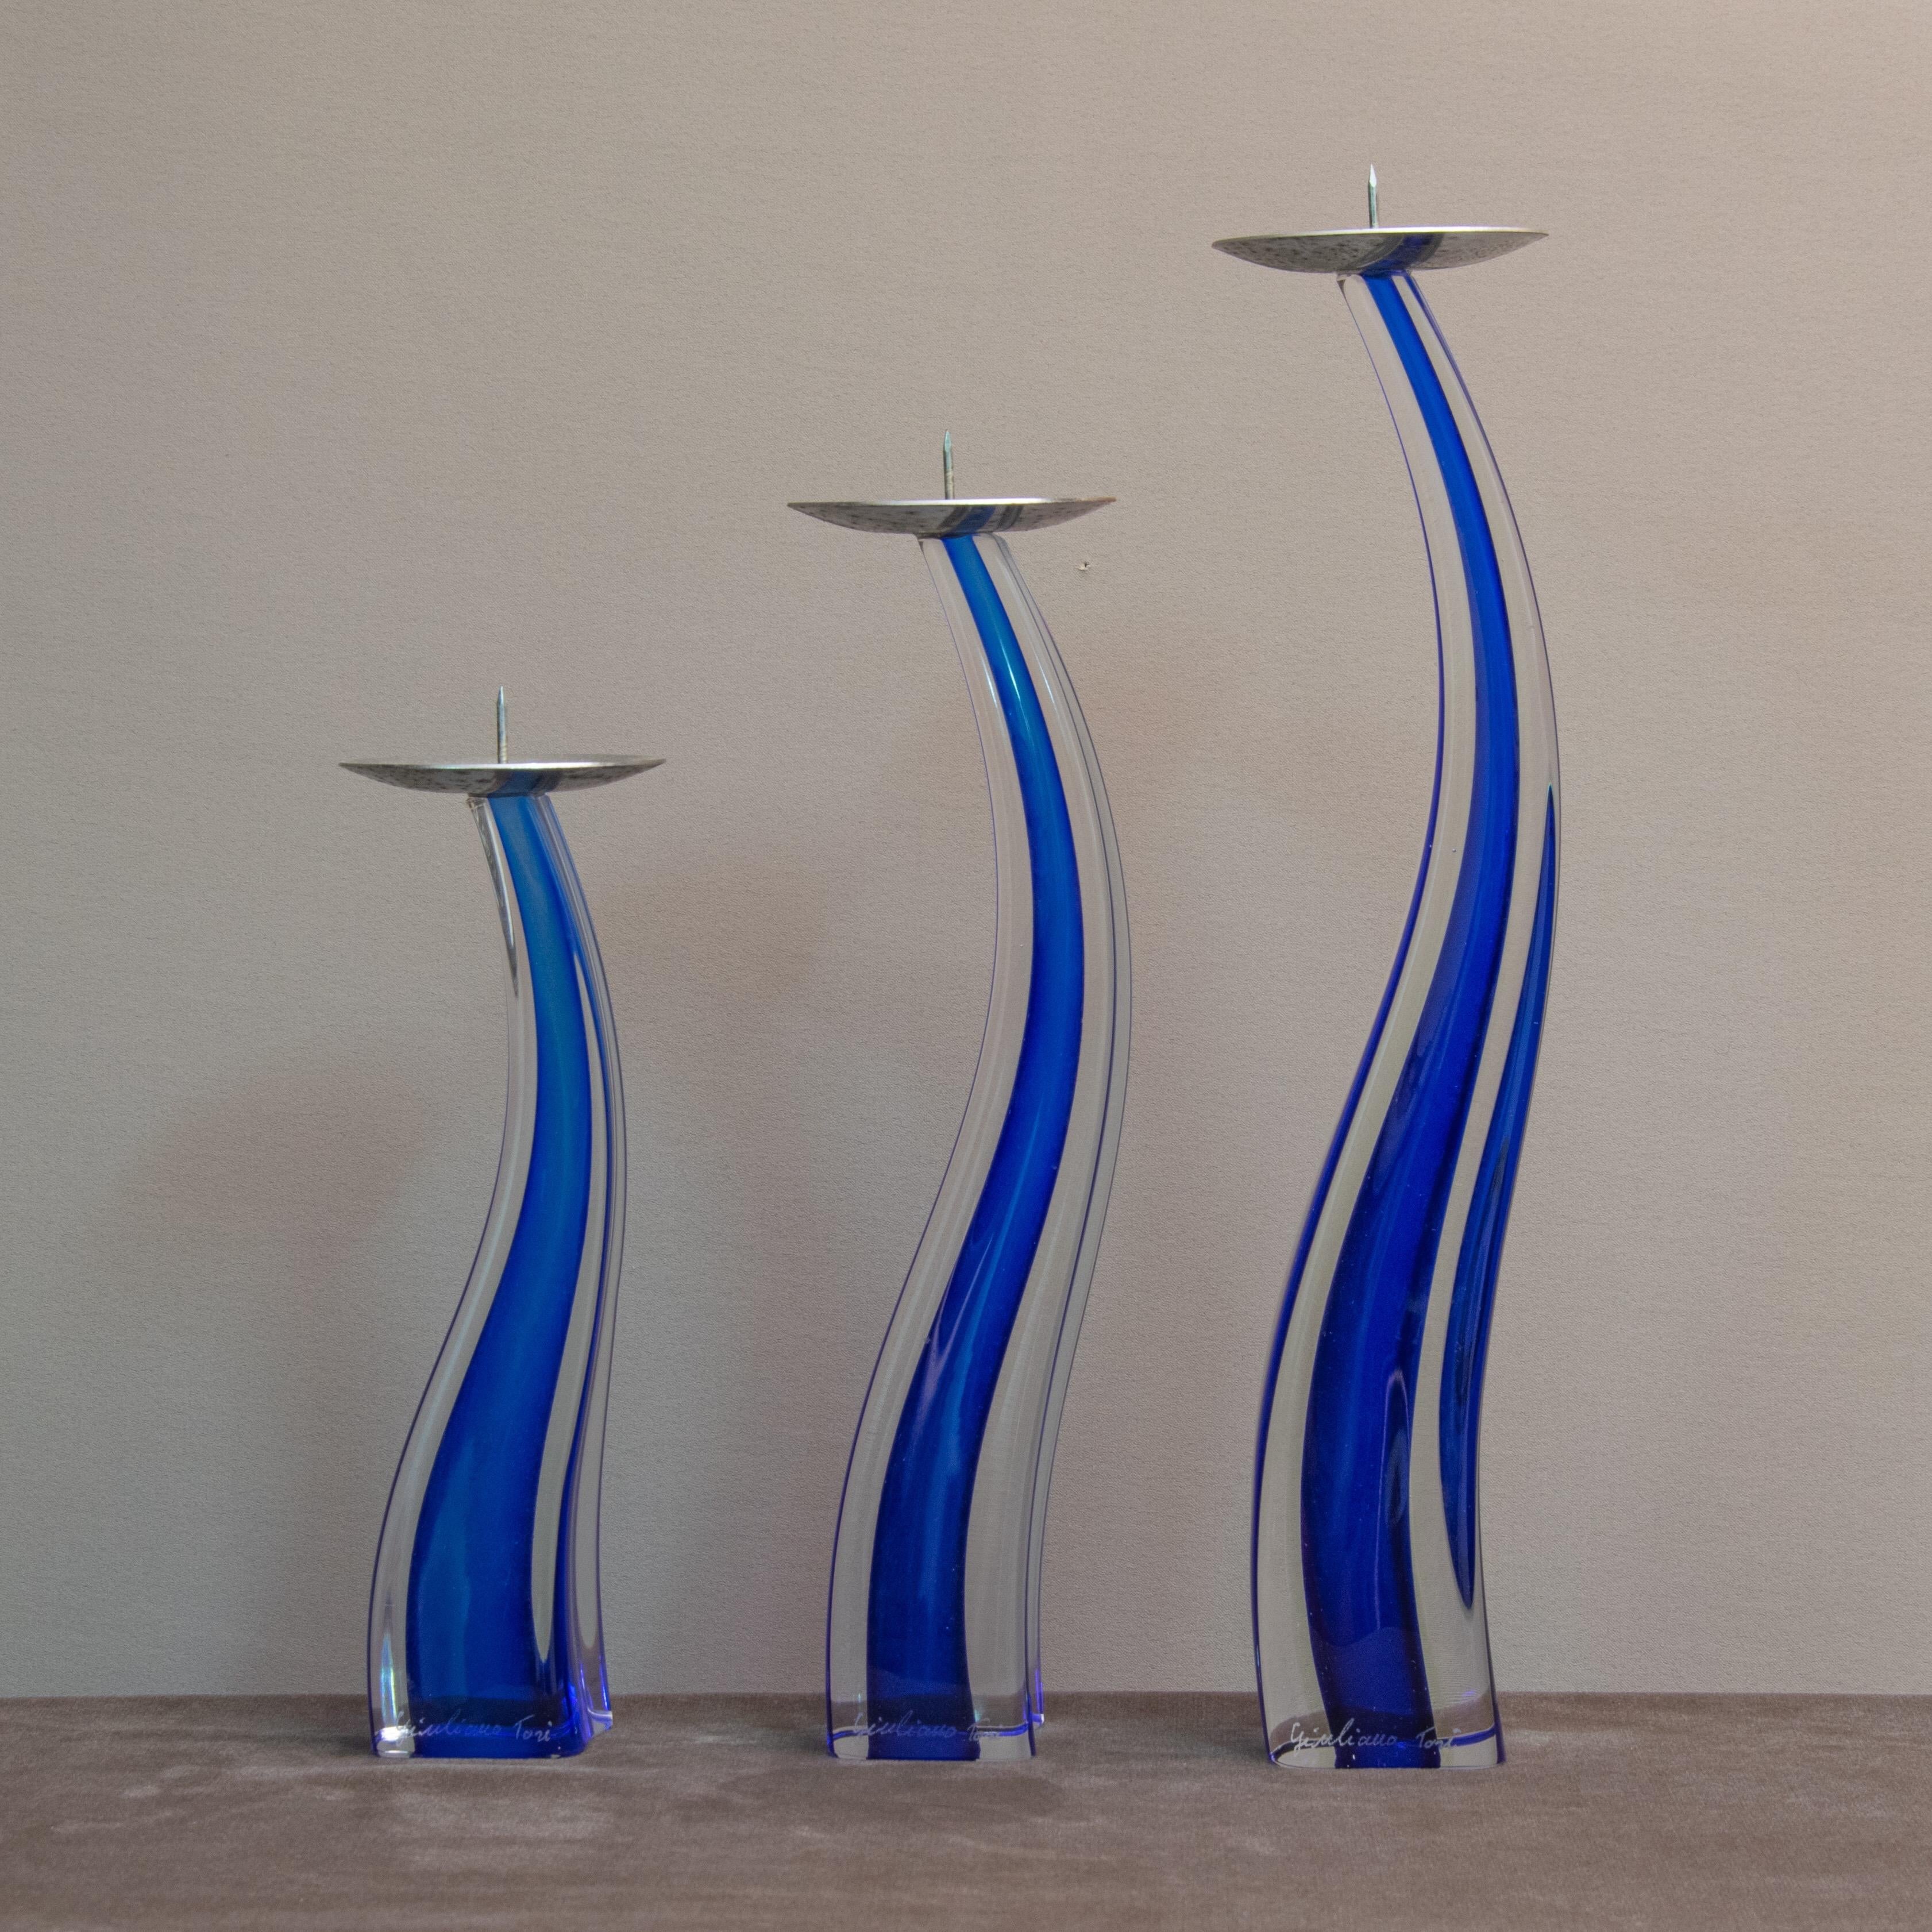 A set of three hand blown curves Cobalt Blue glass cased in clear glass. Murano glass candlesticks designed by Giuliano Tosi for Oggetti in the 1980s.
All three candle sticks are signed by Giuliano Tosi
Measurements:

Measures: Large 12.75 high x